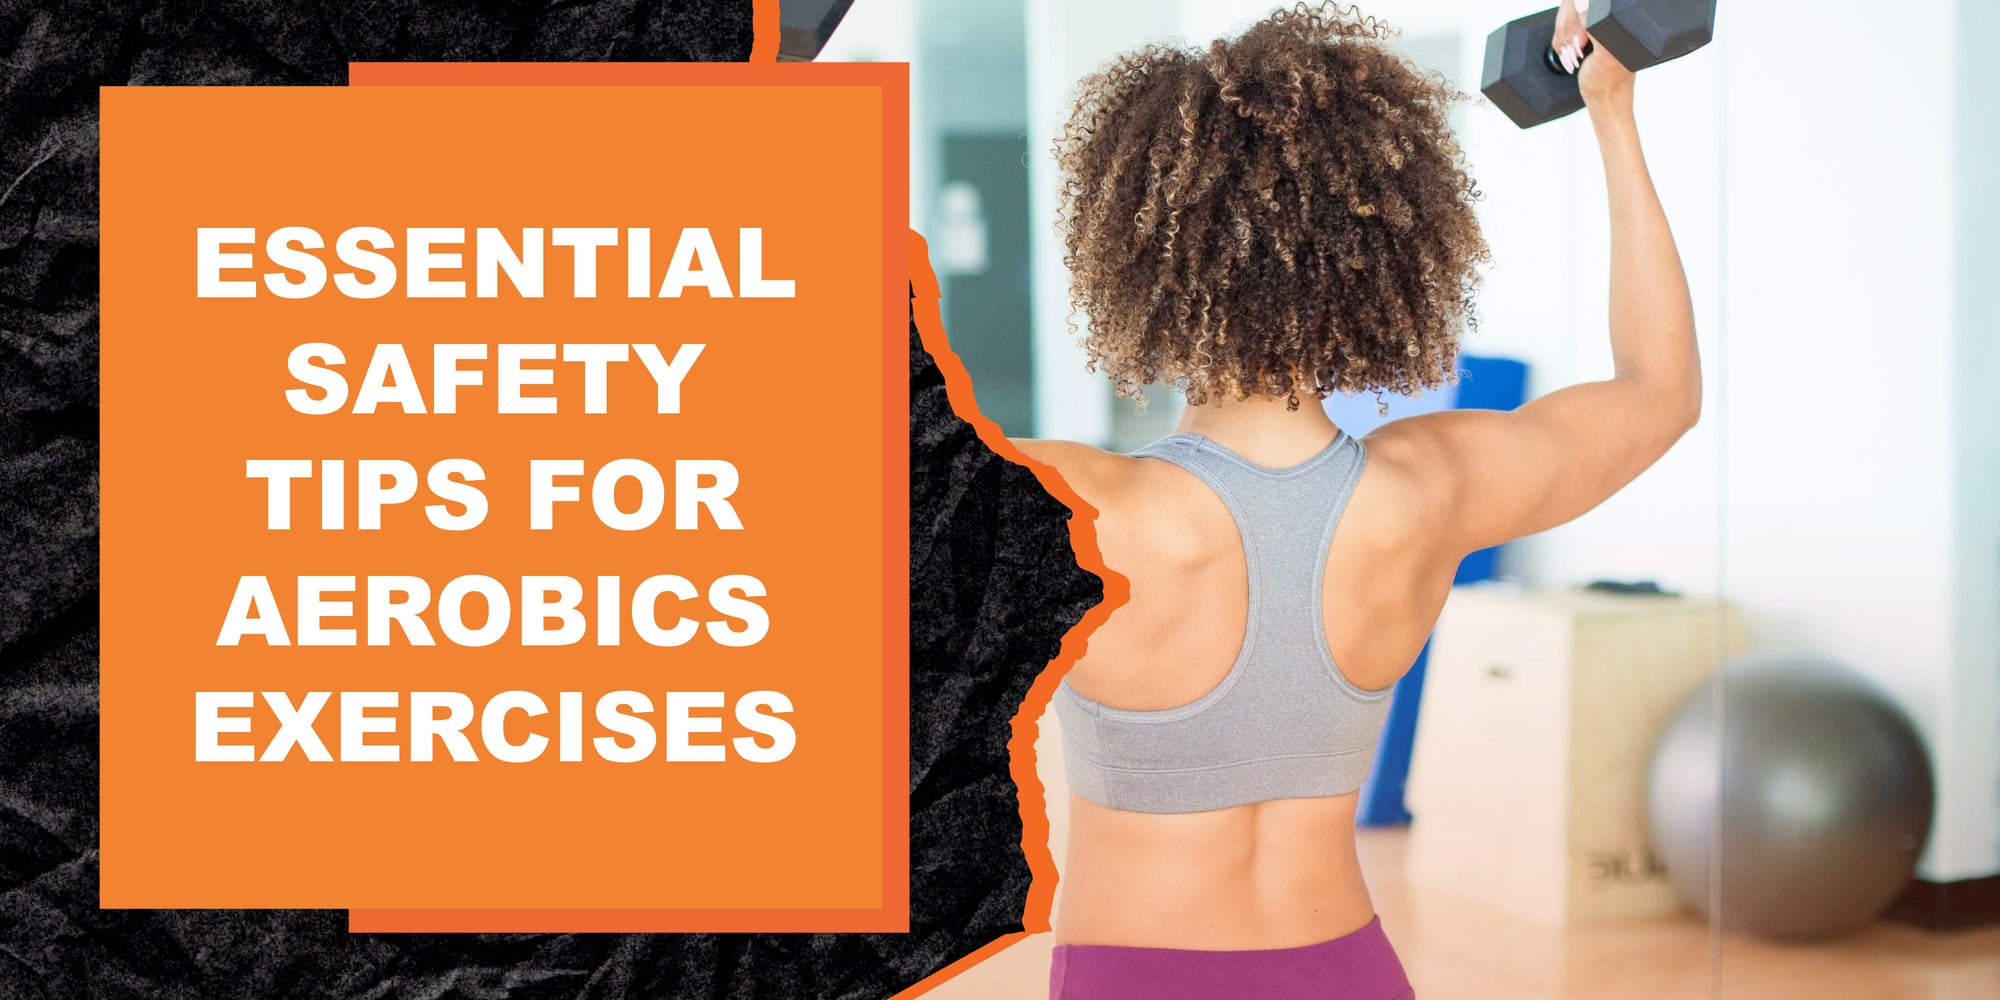 Essential Safety Tips for Aerobics Exercises